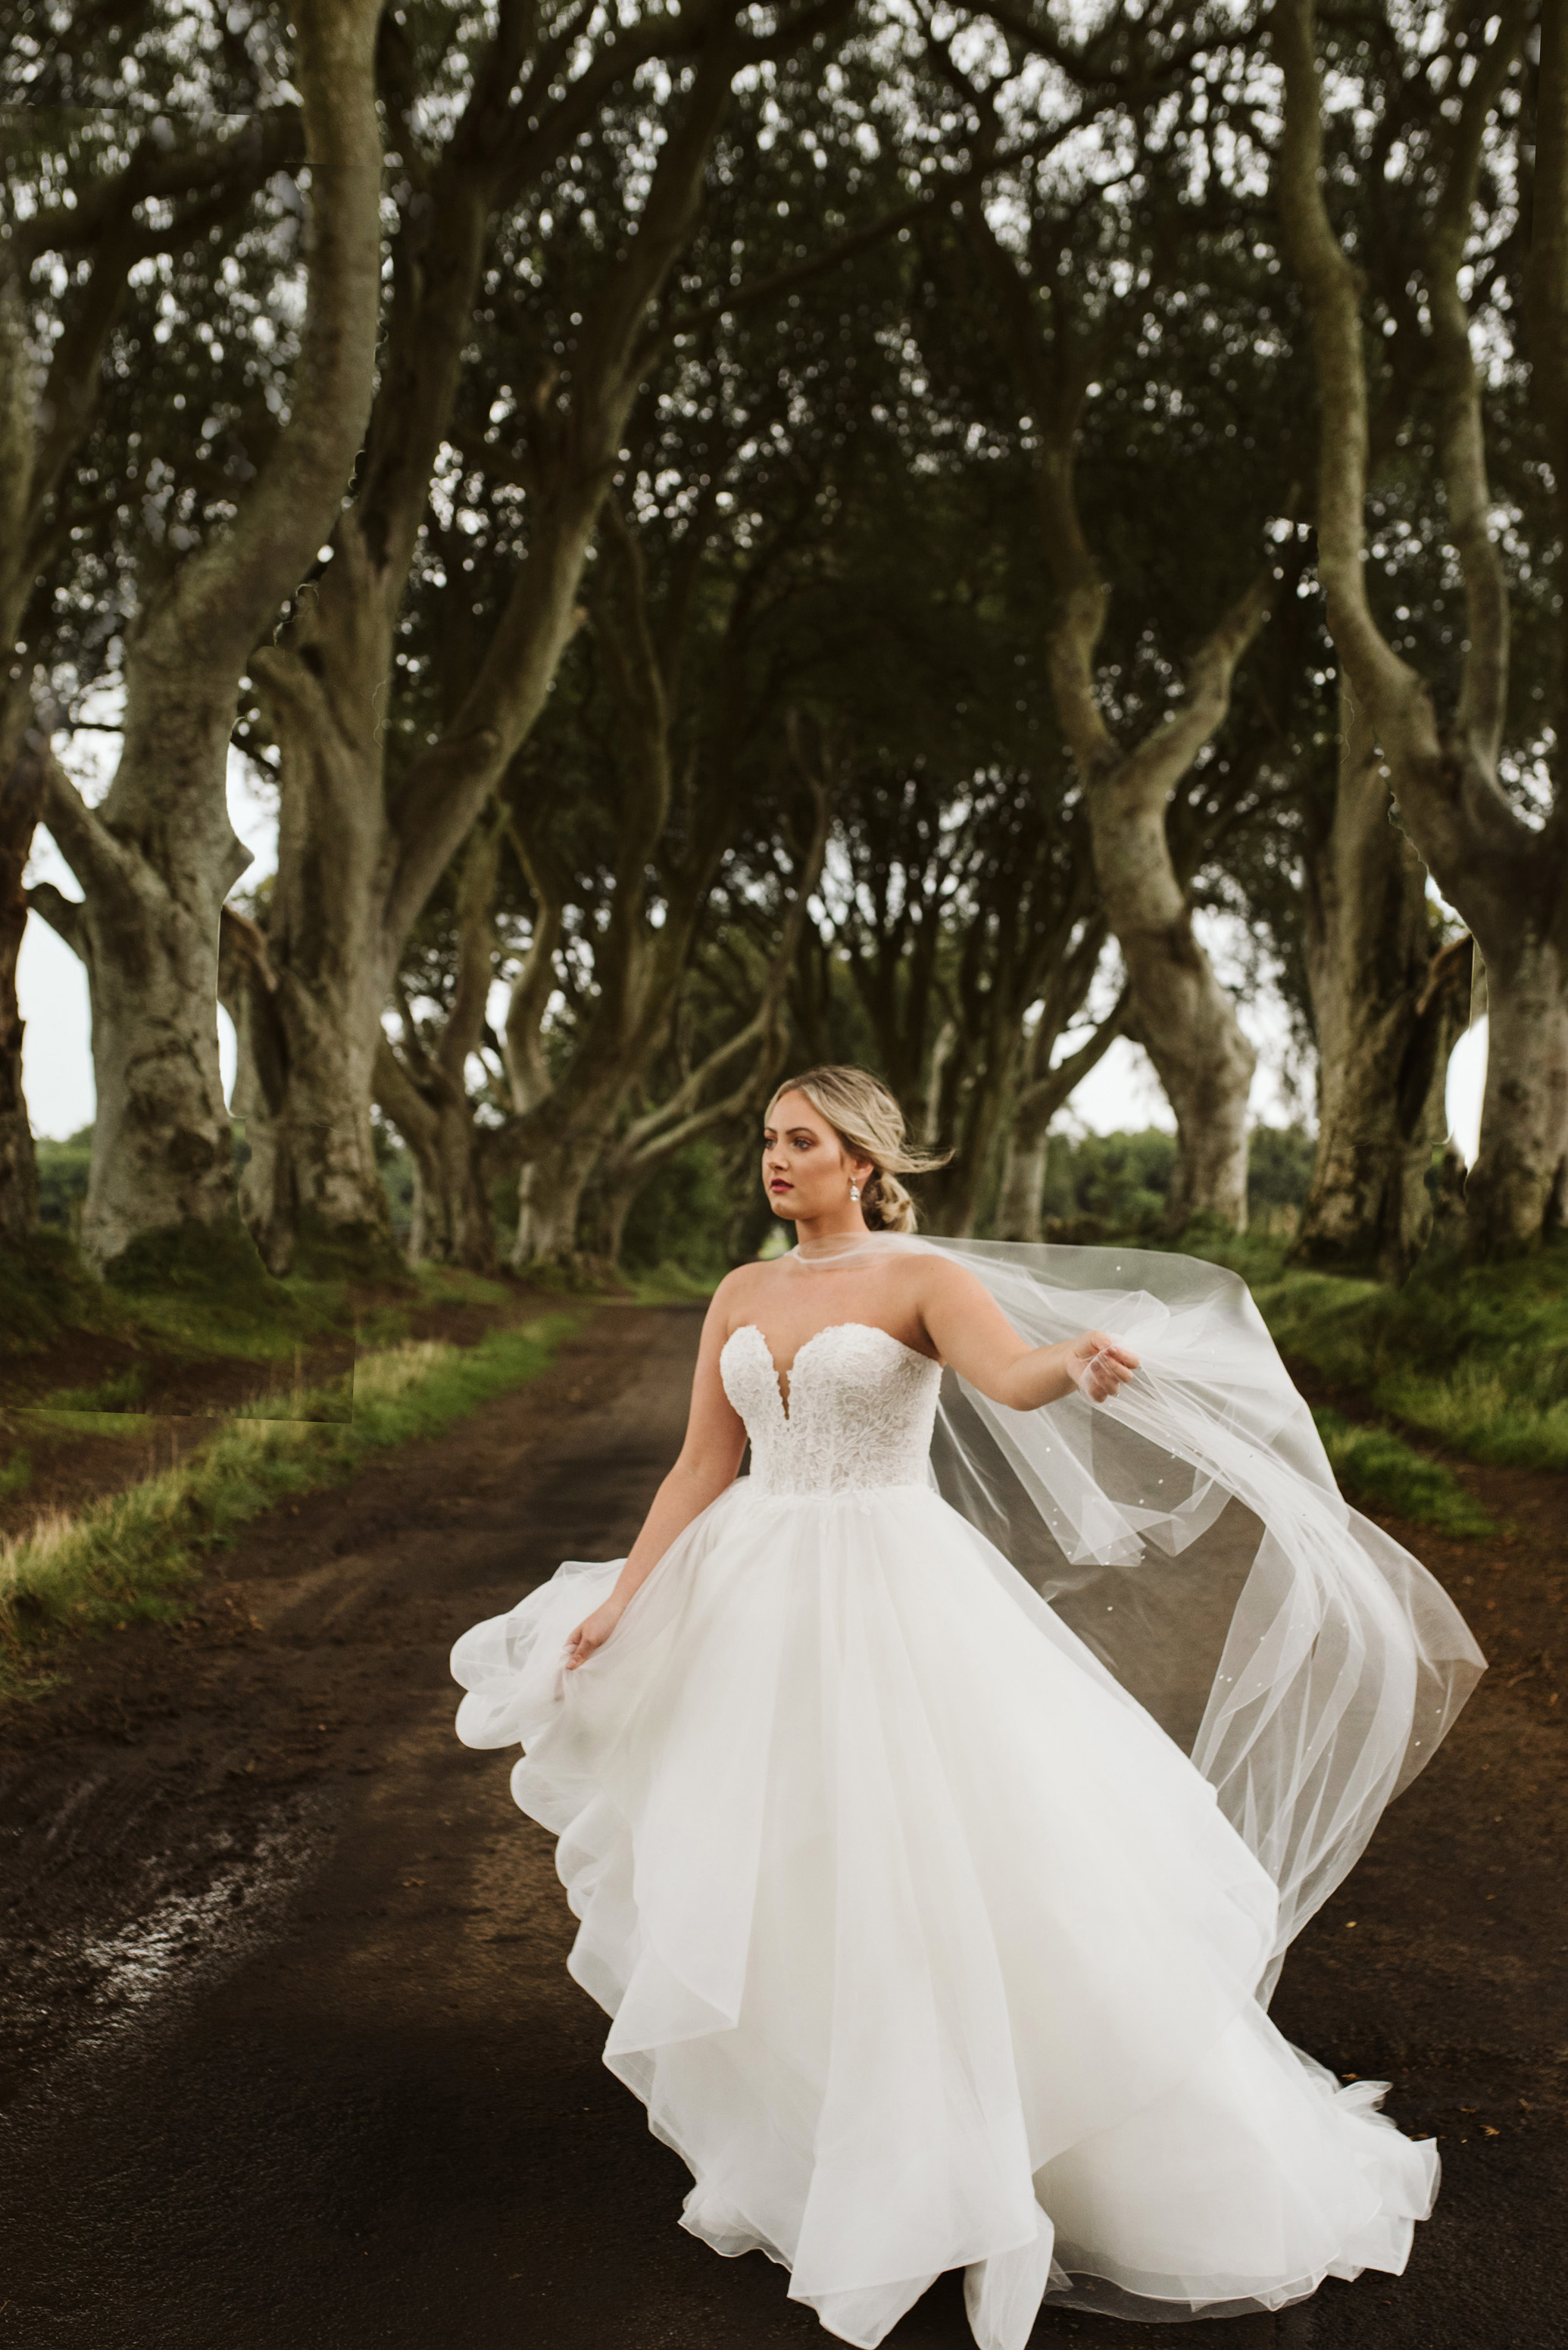 Bride wearing a lace and tulle horsehair ballgown wedding dress while her tulle cape blows in the wind at The Dark Hedges in Northern Ireland